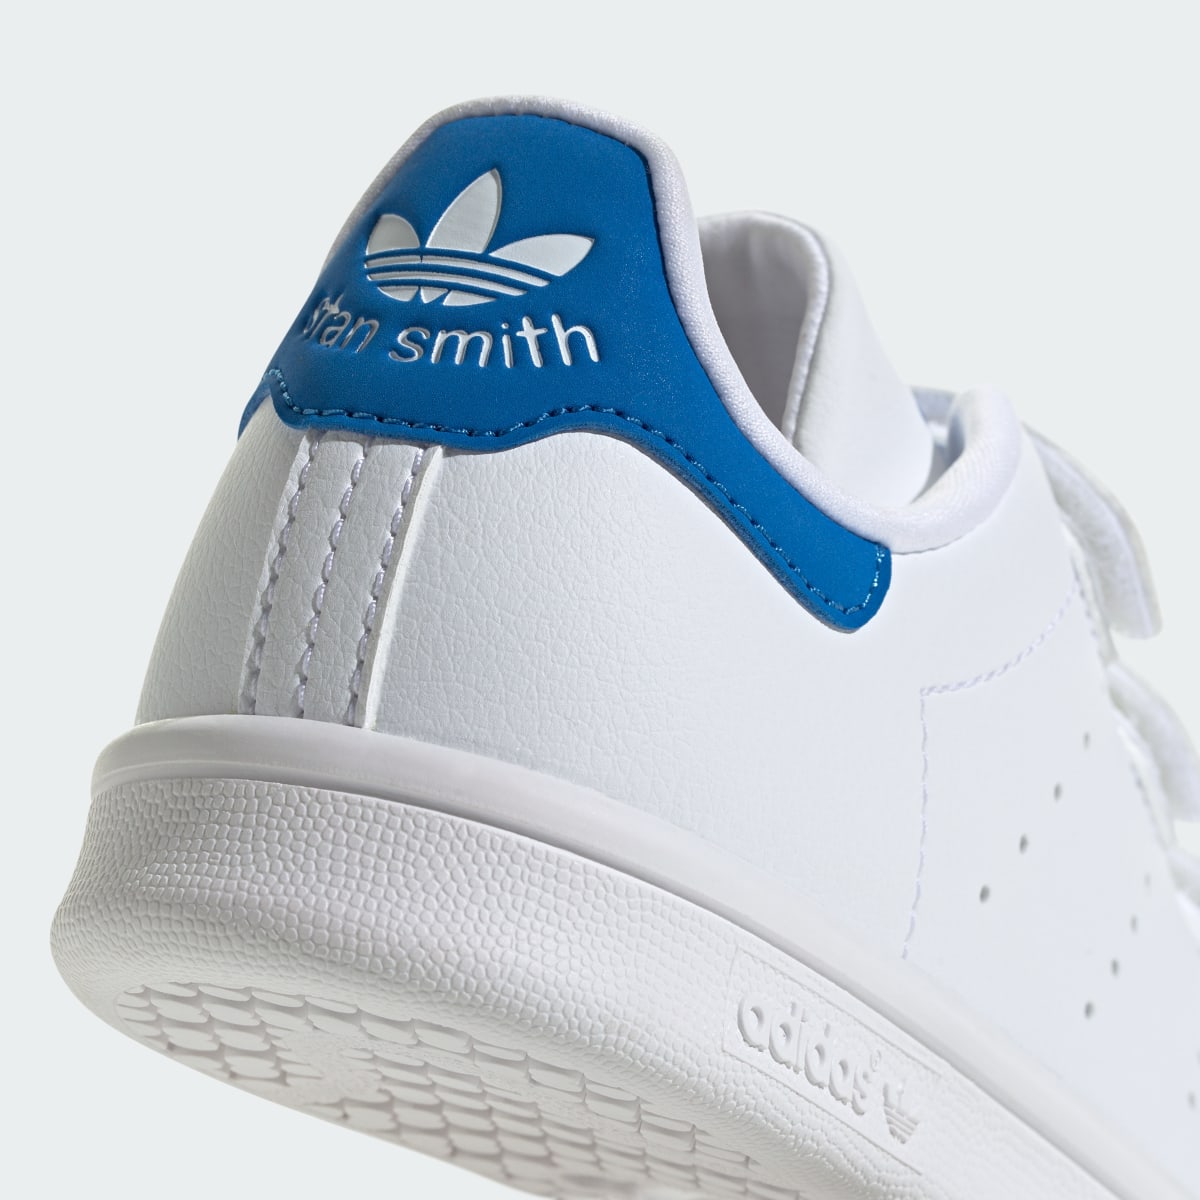 Adidas Stan Smith Comfort Closure Shoes Kids. 9